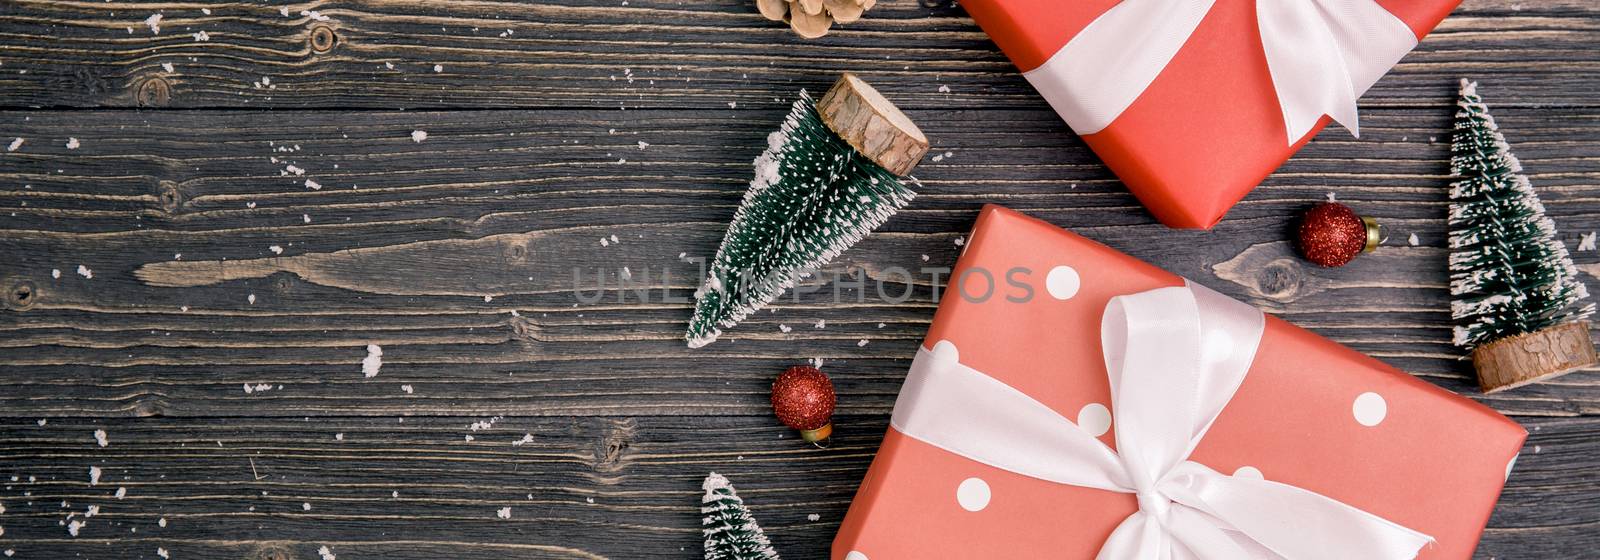 Christmas holiday composition with red gift box decoration on wooden background, new year and xmas or anniversary with presents on wood table in season, top view or flat lay, banner website.